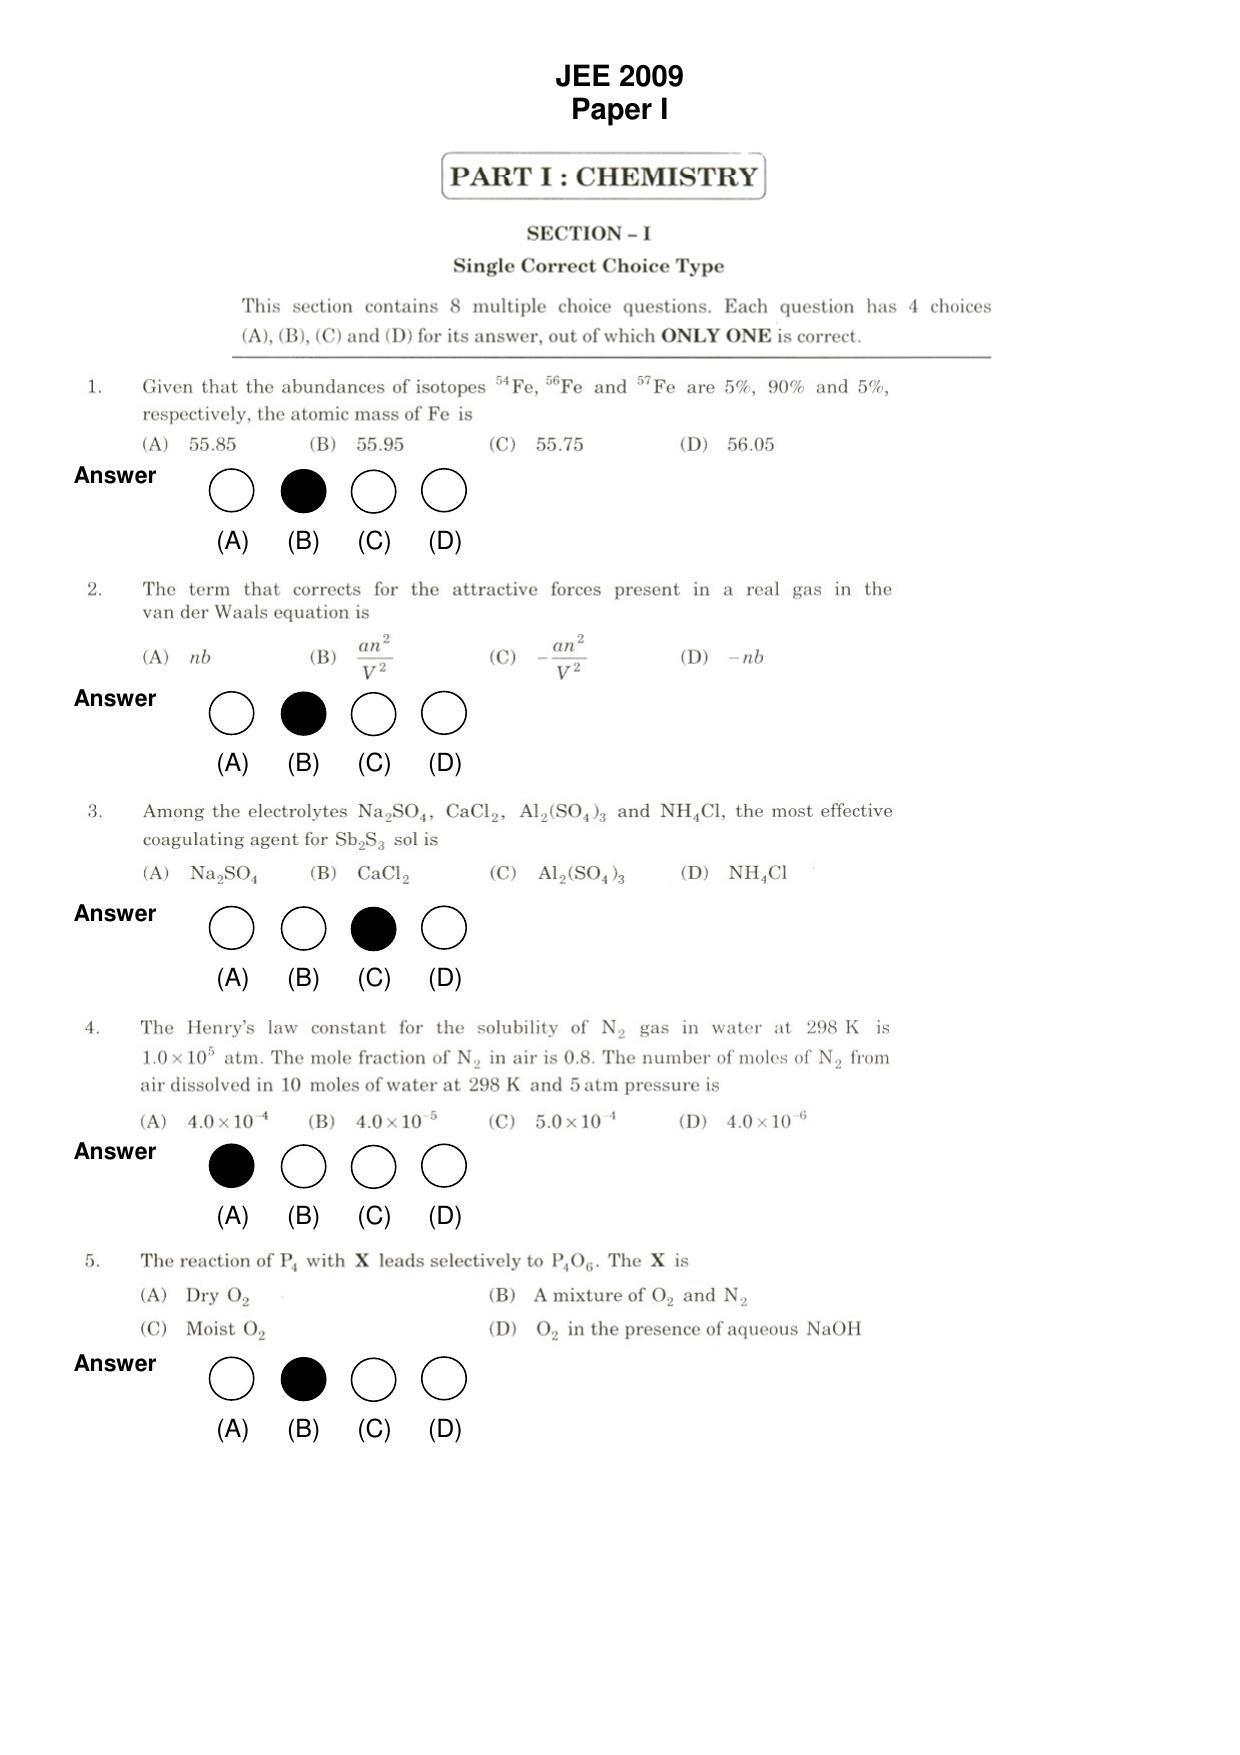 JEE 2009 Paper I Question Paper - Page 1